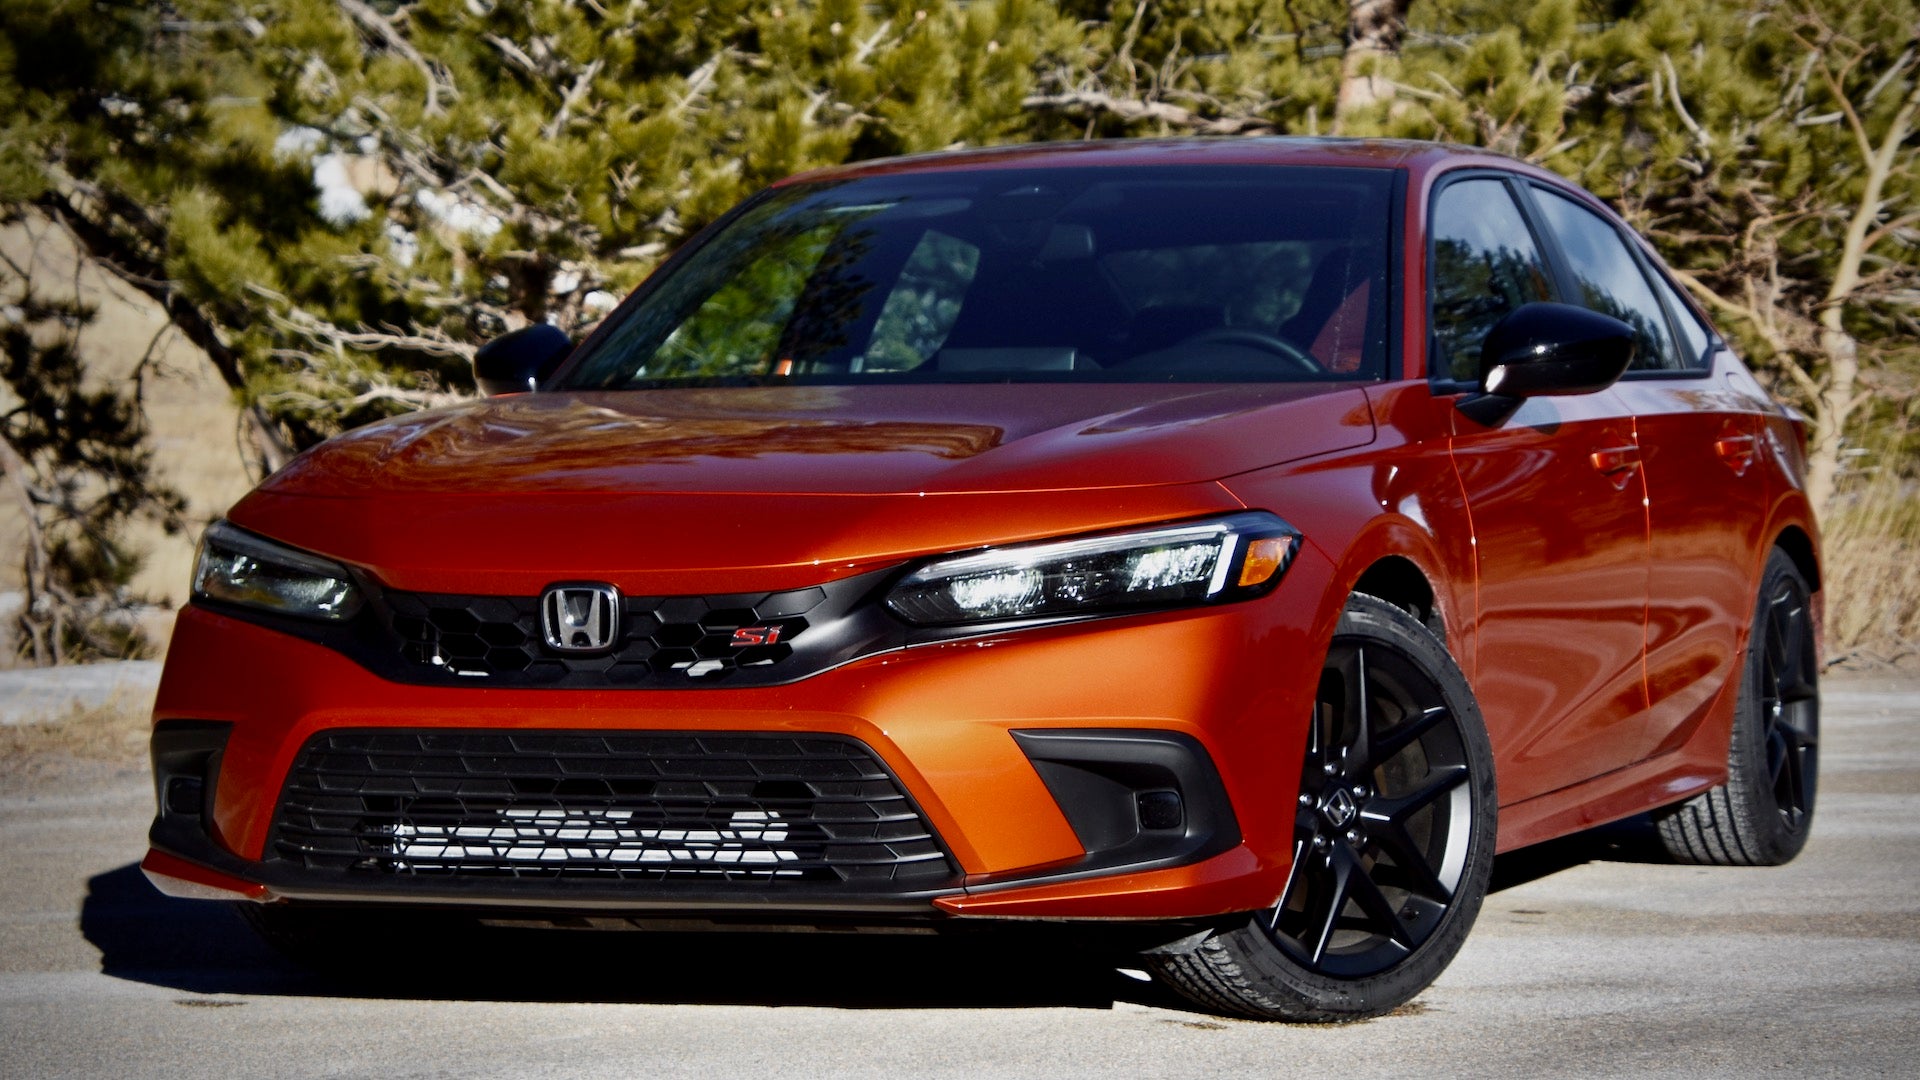 Honda Civic Type R Black Edition Marks End of Current Generation